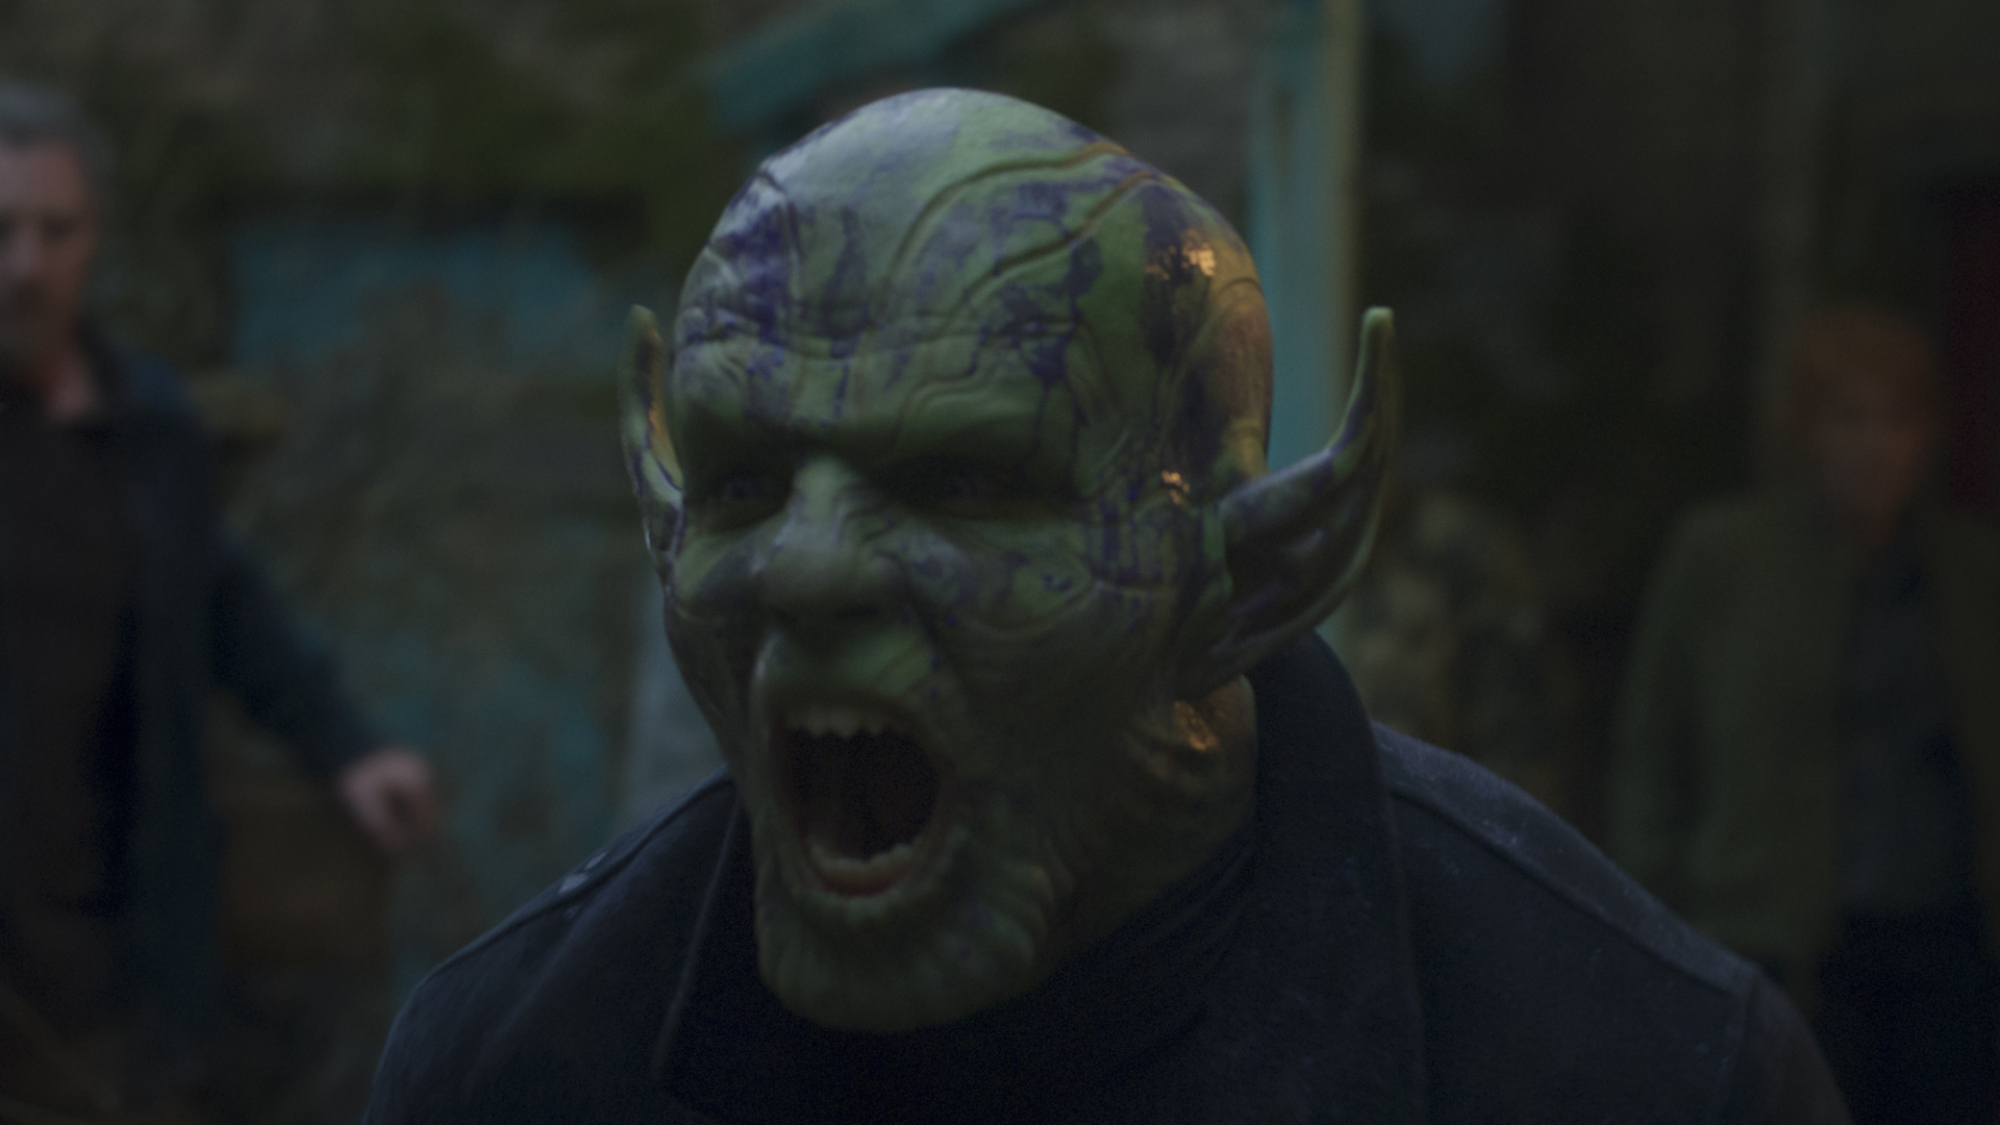 In the Marvel series "Secret Invasion" a Skrull roars — an alien with green skin and pointed ears.